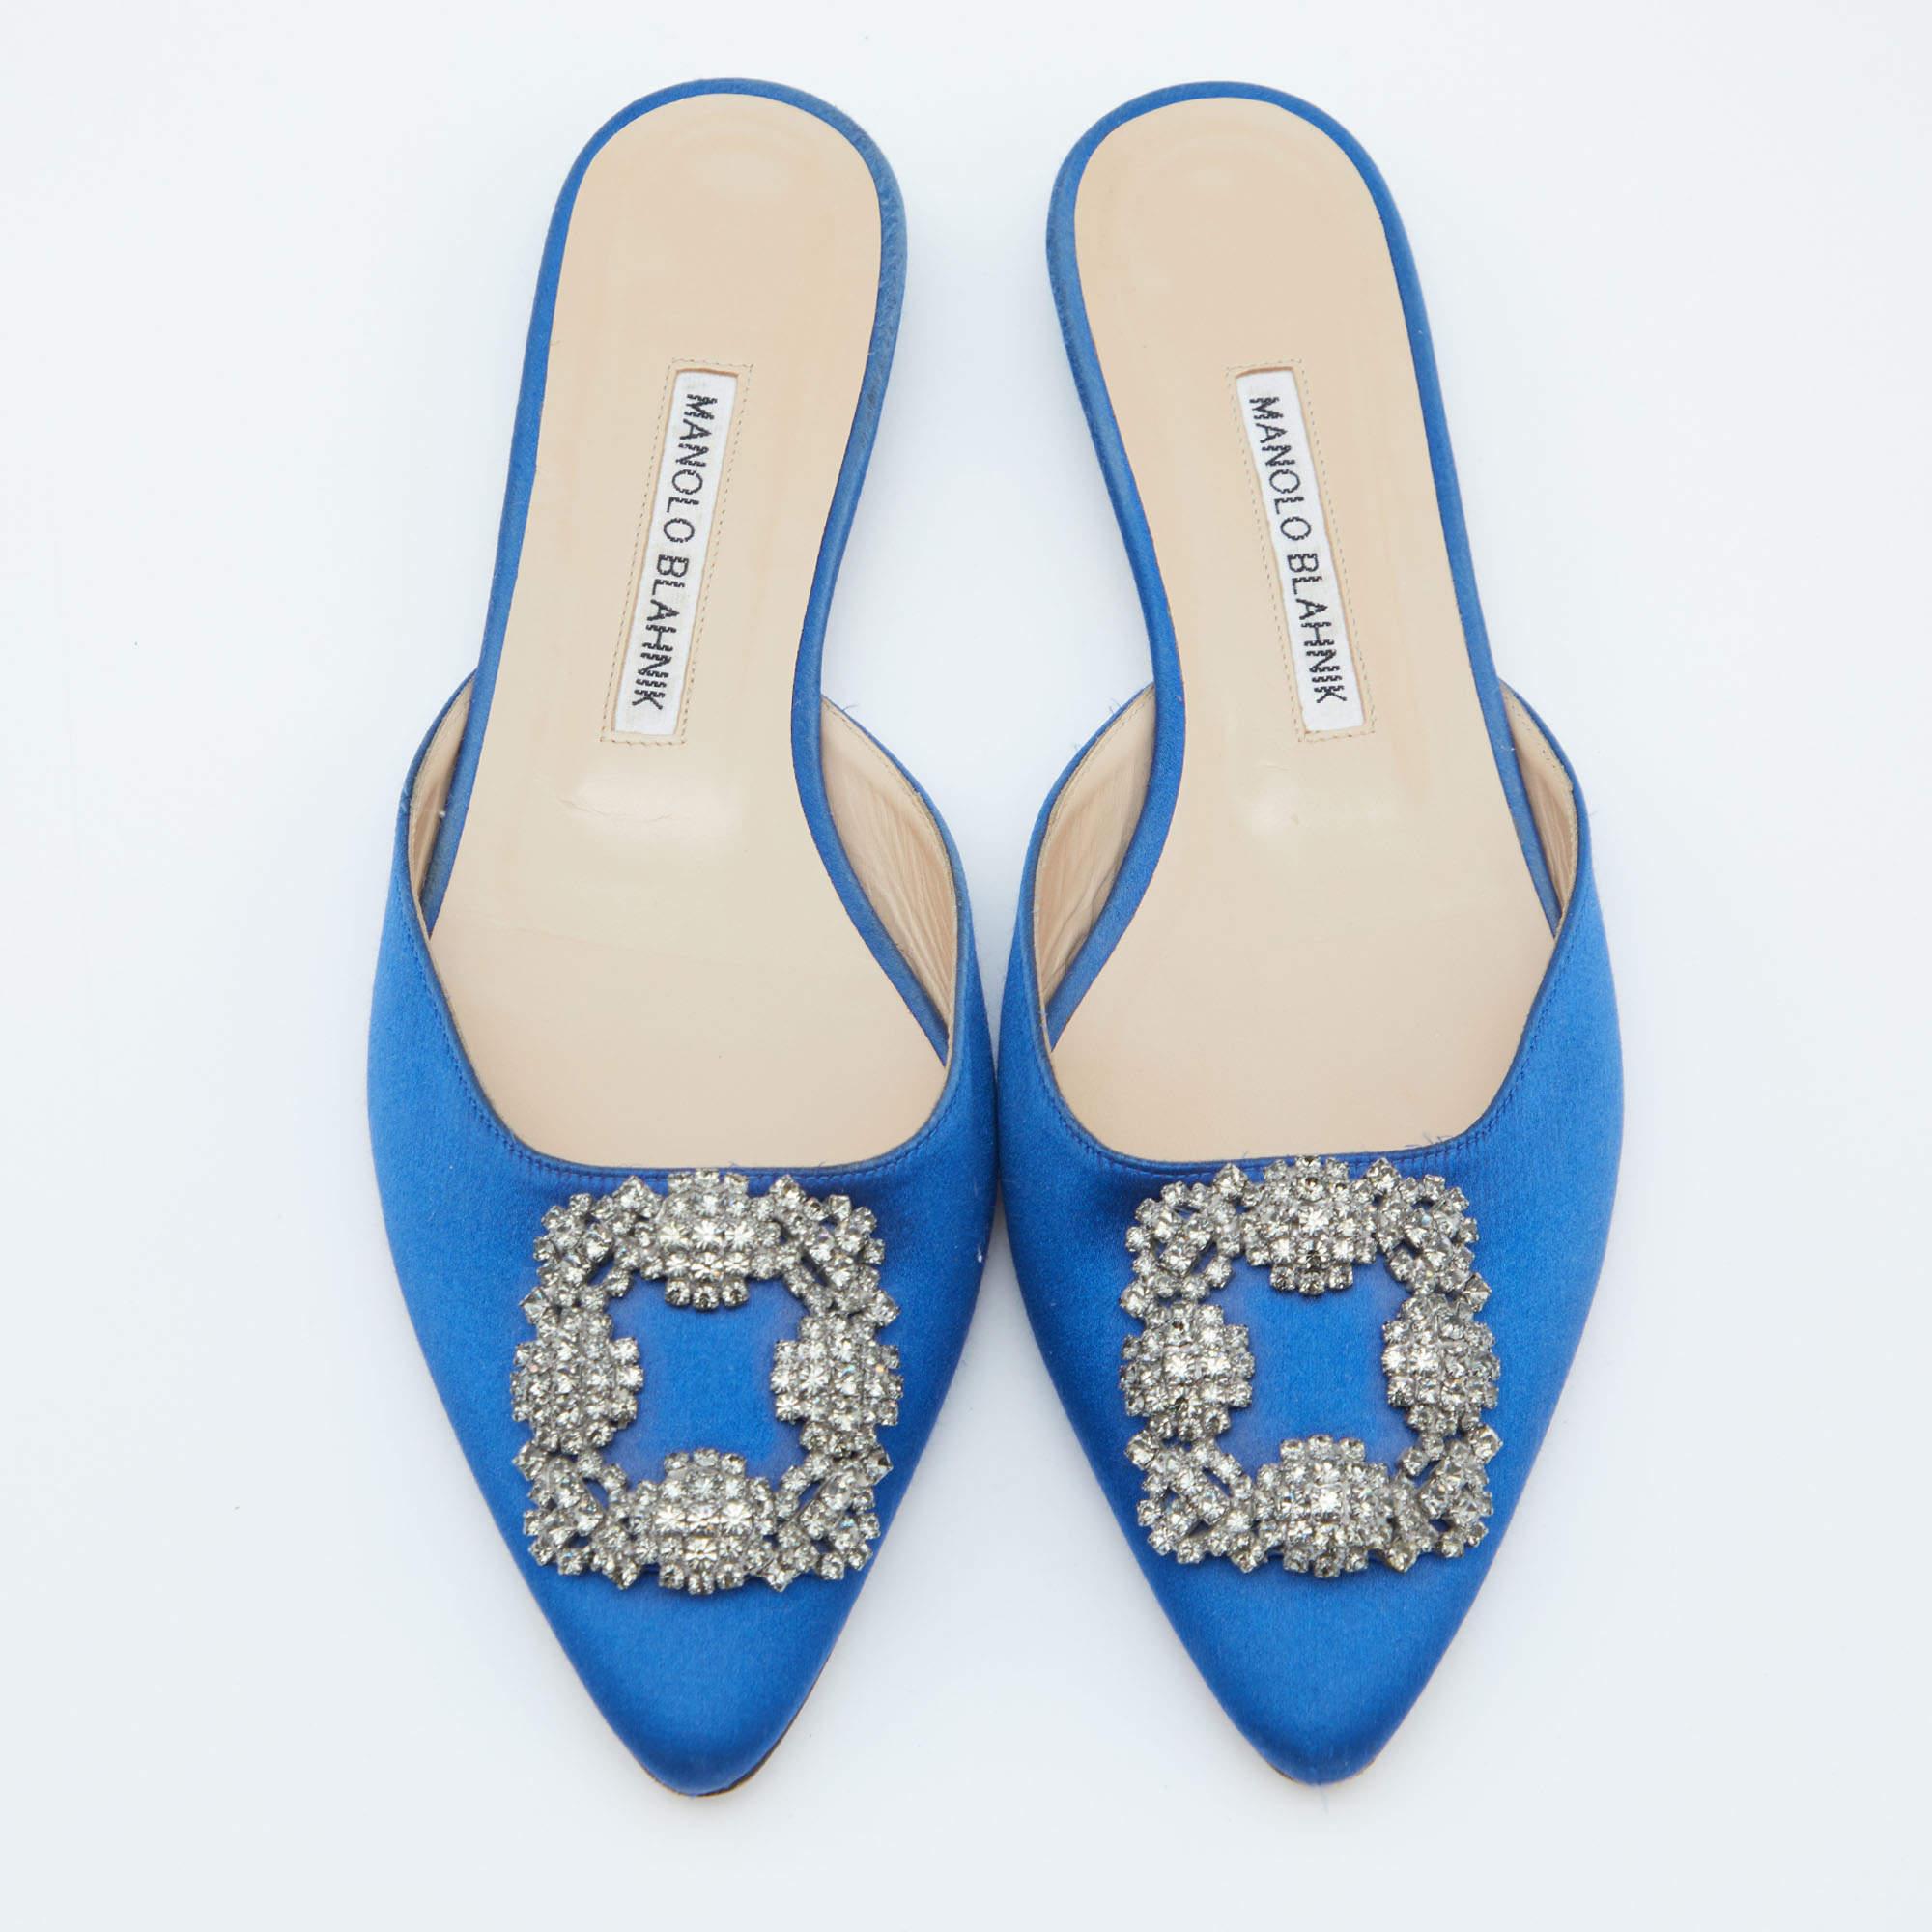 Designed for go-getters, these mules are made for everyday use so that you can be a stylish achiever each day. Be it any occasion, they will match any outfit like a dream. They are decorated with an appealing crystal embellishment on the uppers and